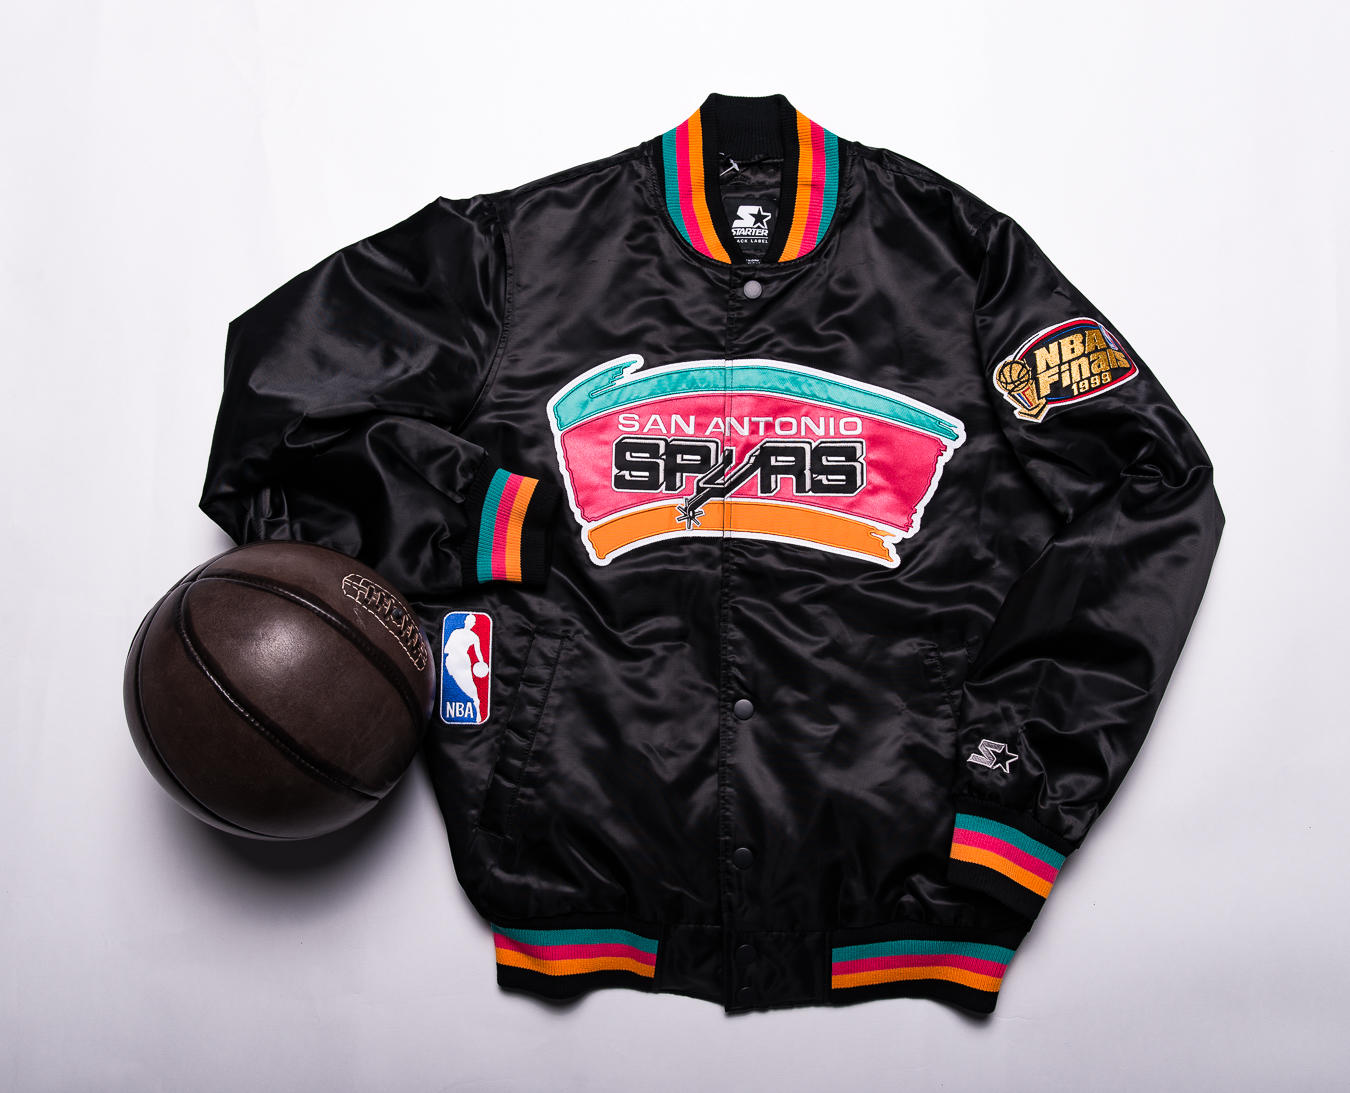 ICYMI: DTLR Teams Up With Starter On a Throwback NBA Jacket Collection